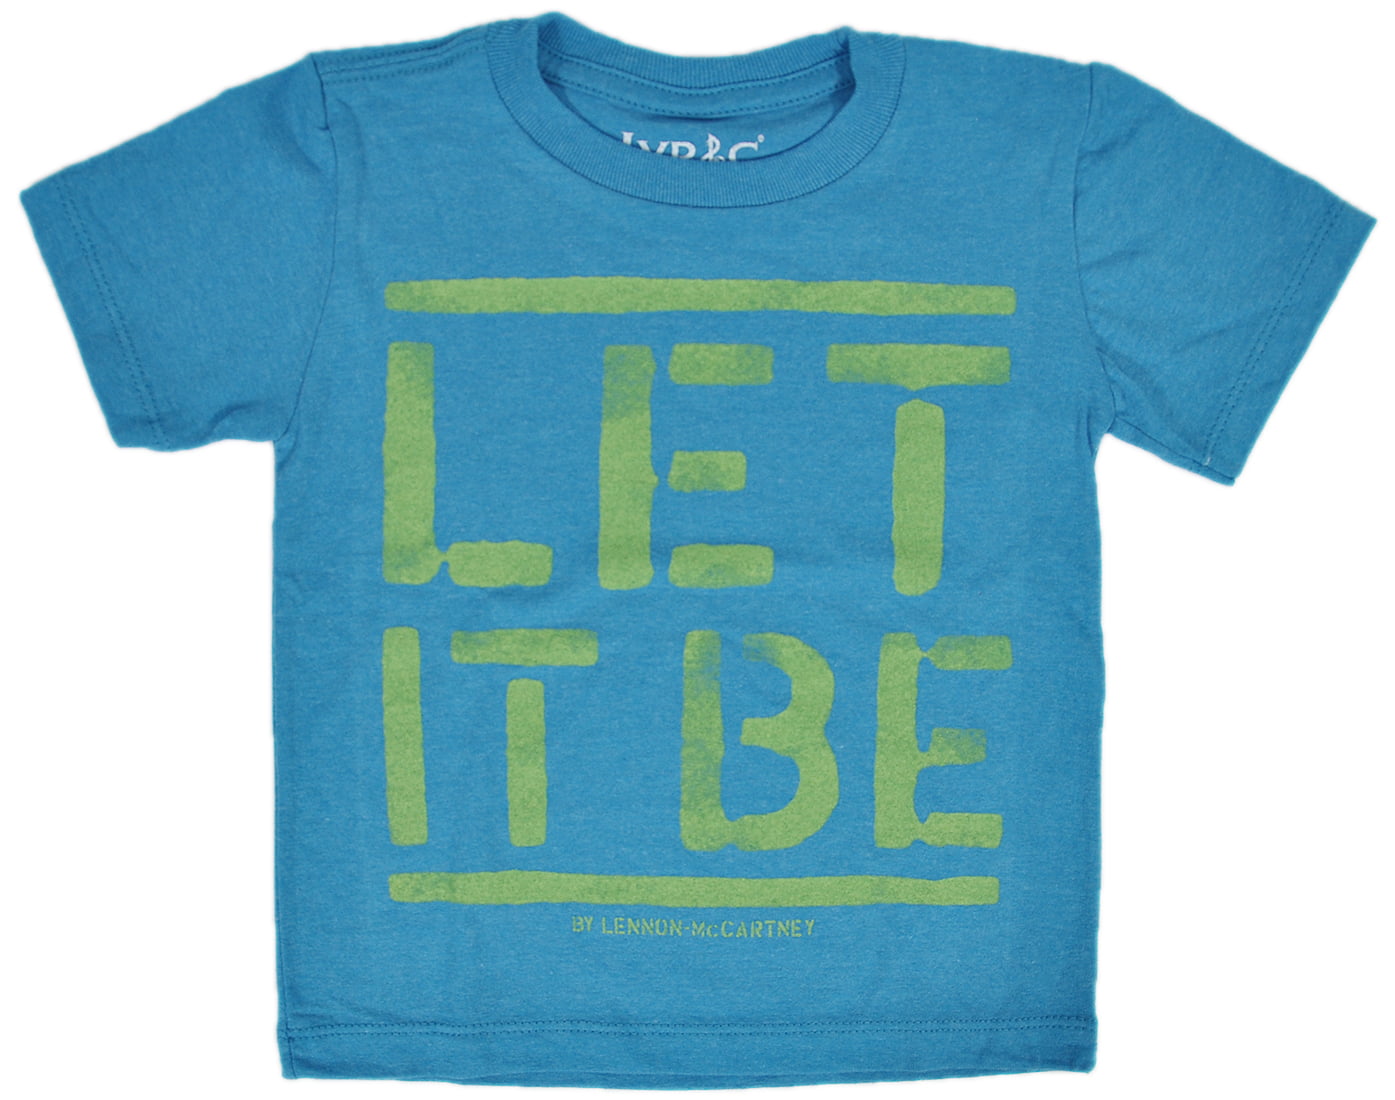 The Beatles - The Beatles Let It Be Toddler Boys T-Shirt size 3T ...